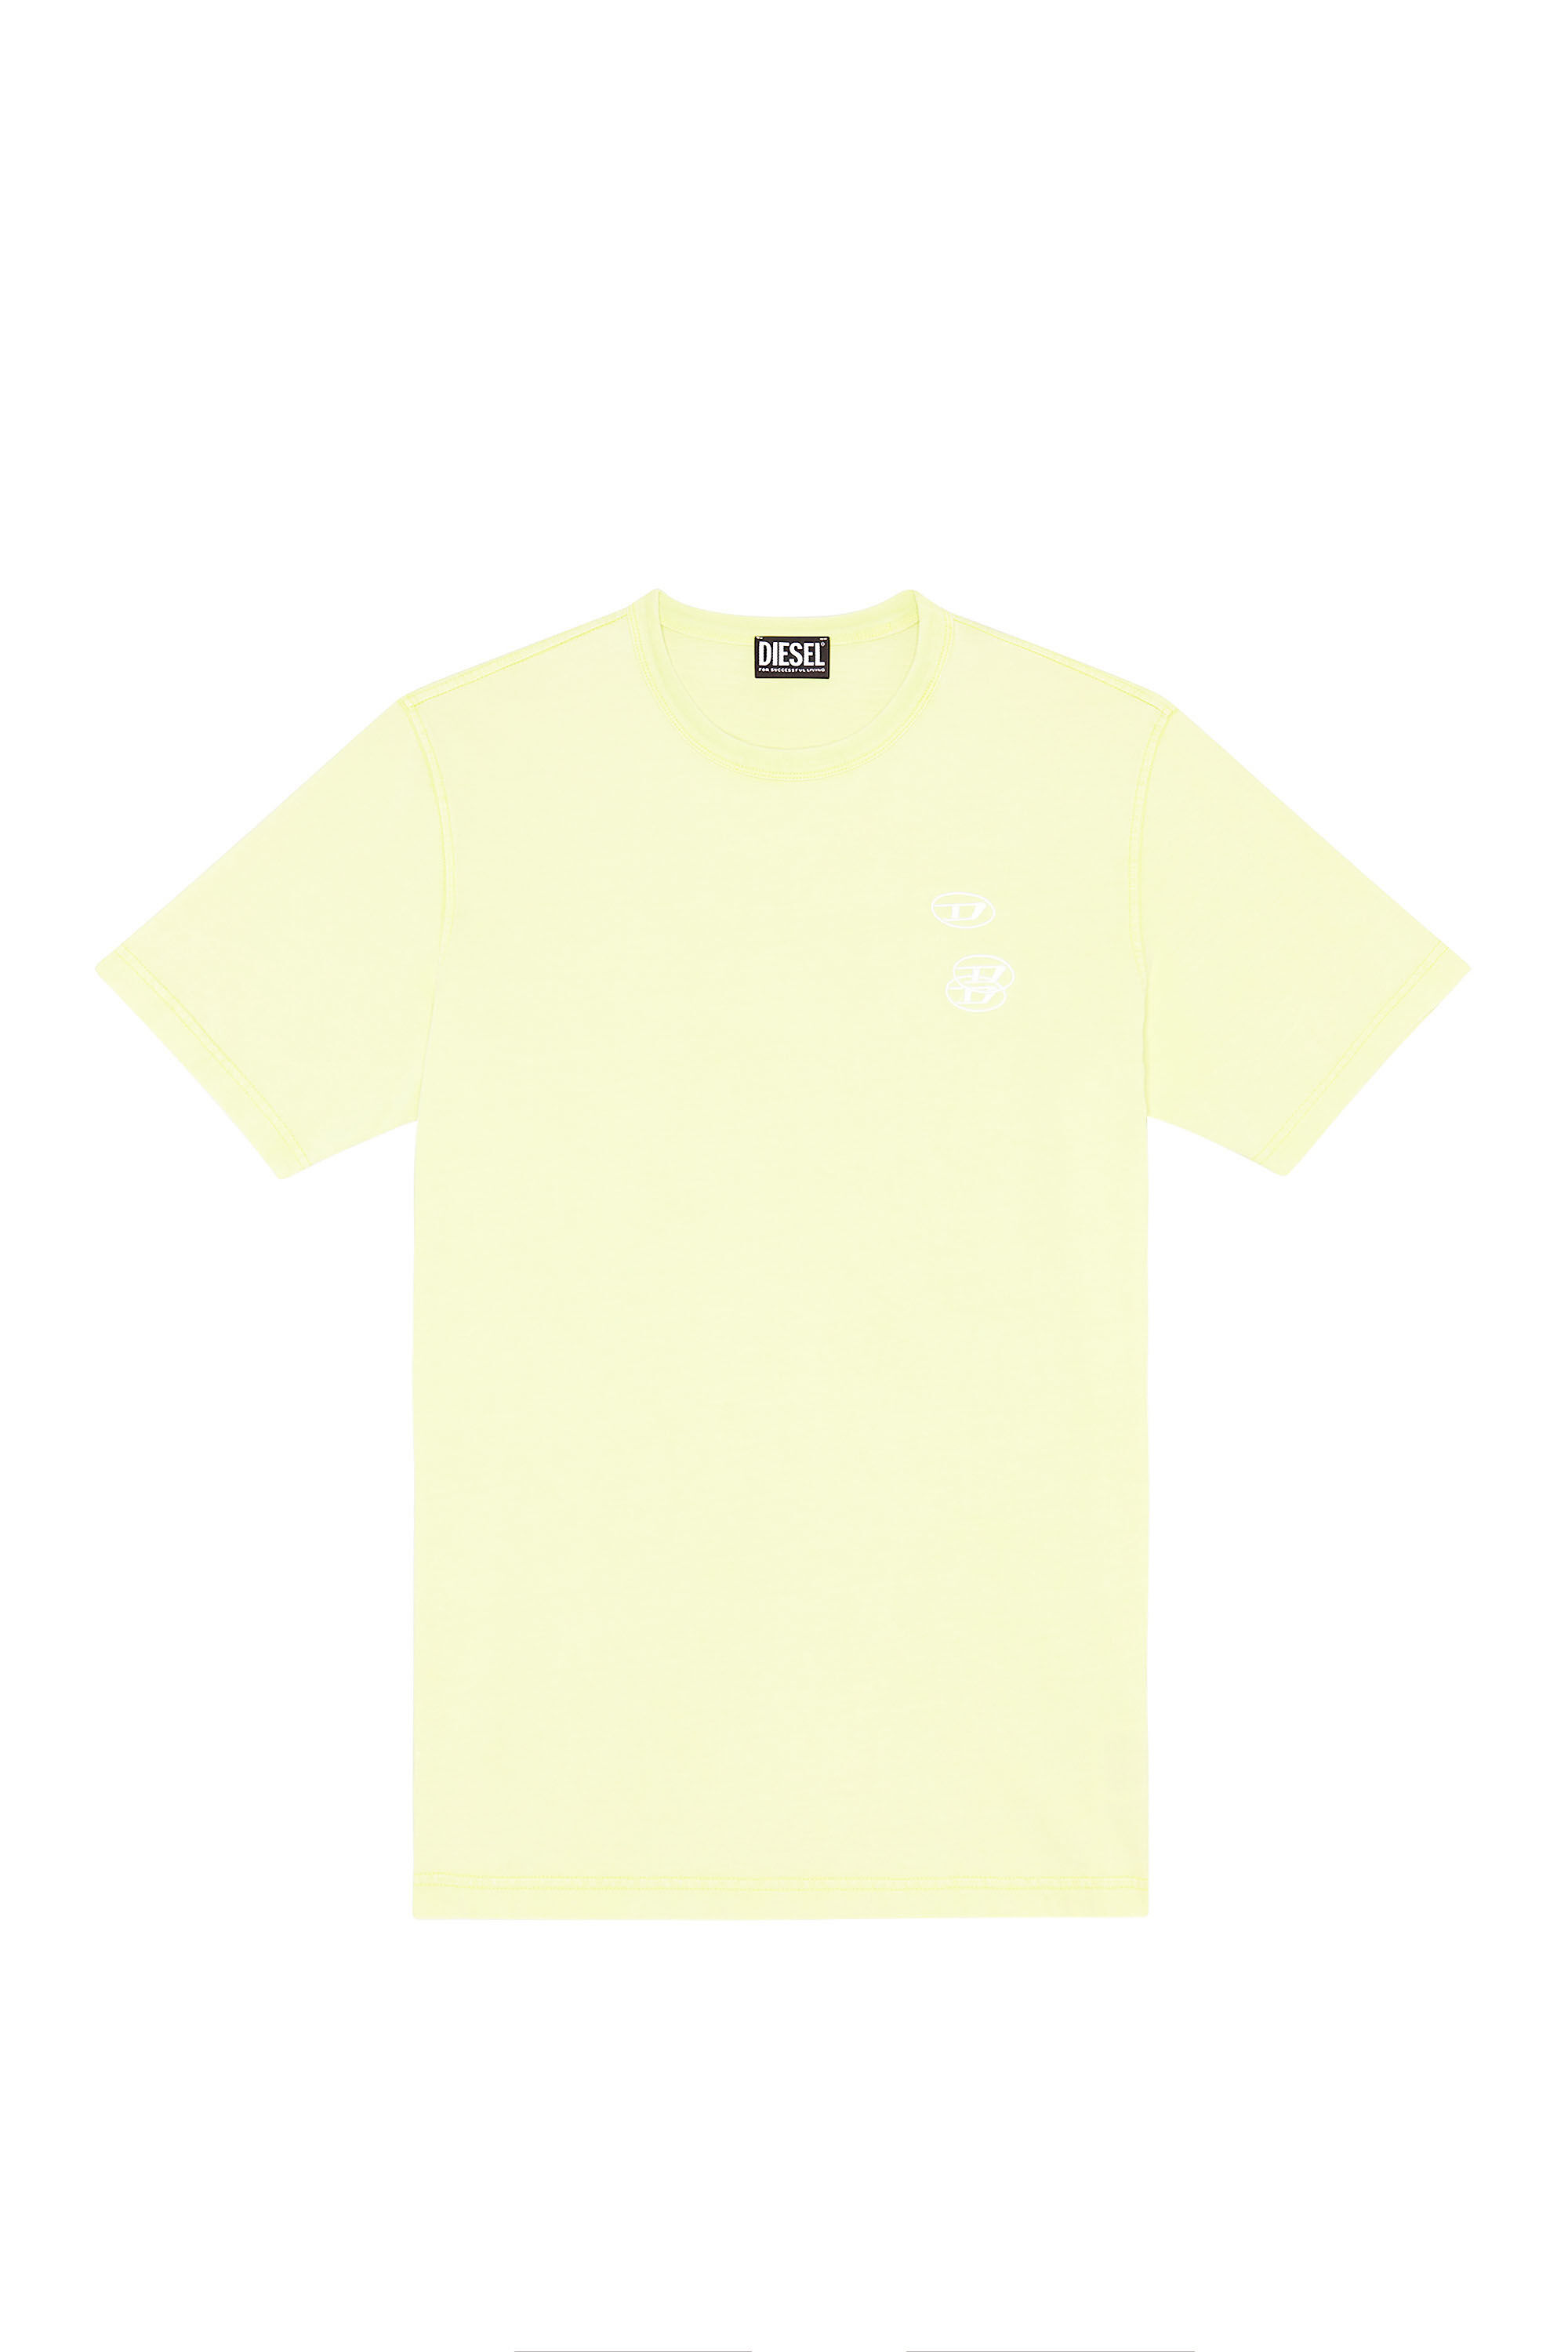 Diesel - T-JUST-G14, Yellow Fluo - Image 2